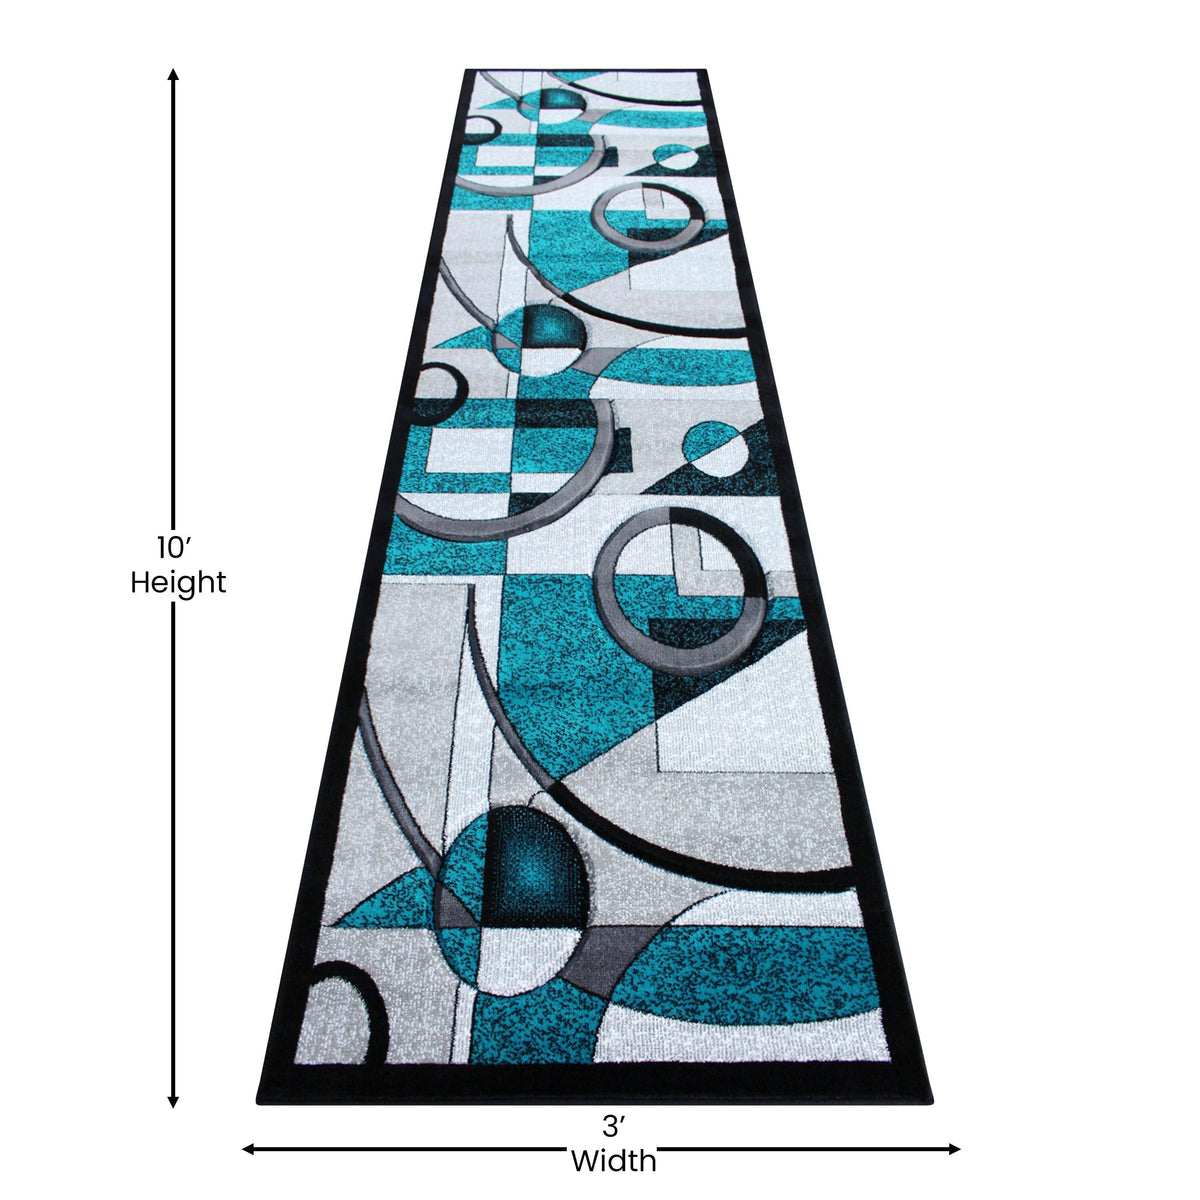 Turquoise,3' x 10' |#| Modern Geometric Abstract Area Rug - Turquoise, Black, & Gray - 3' x 10'